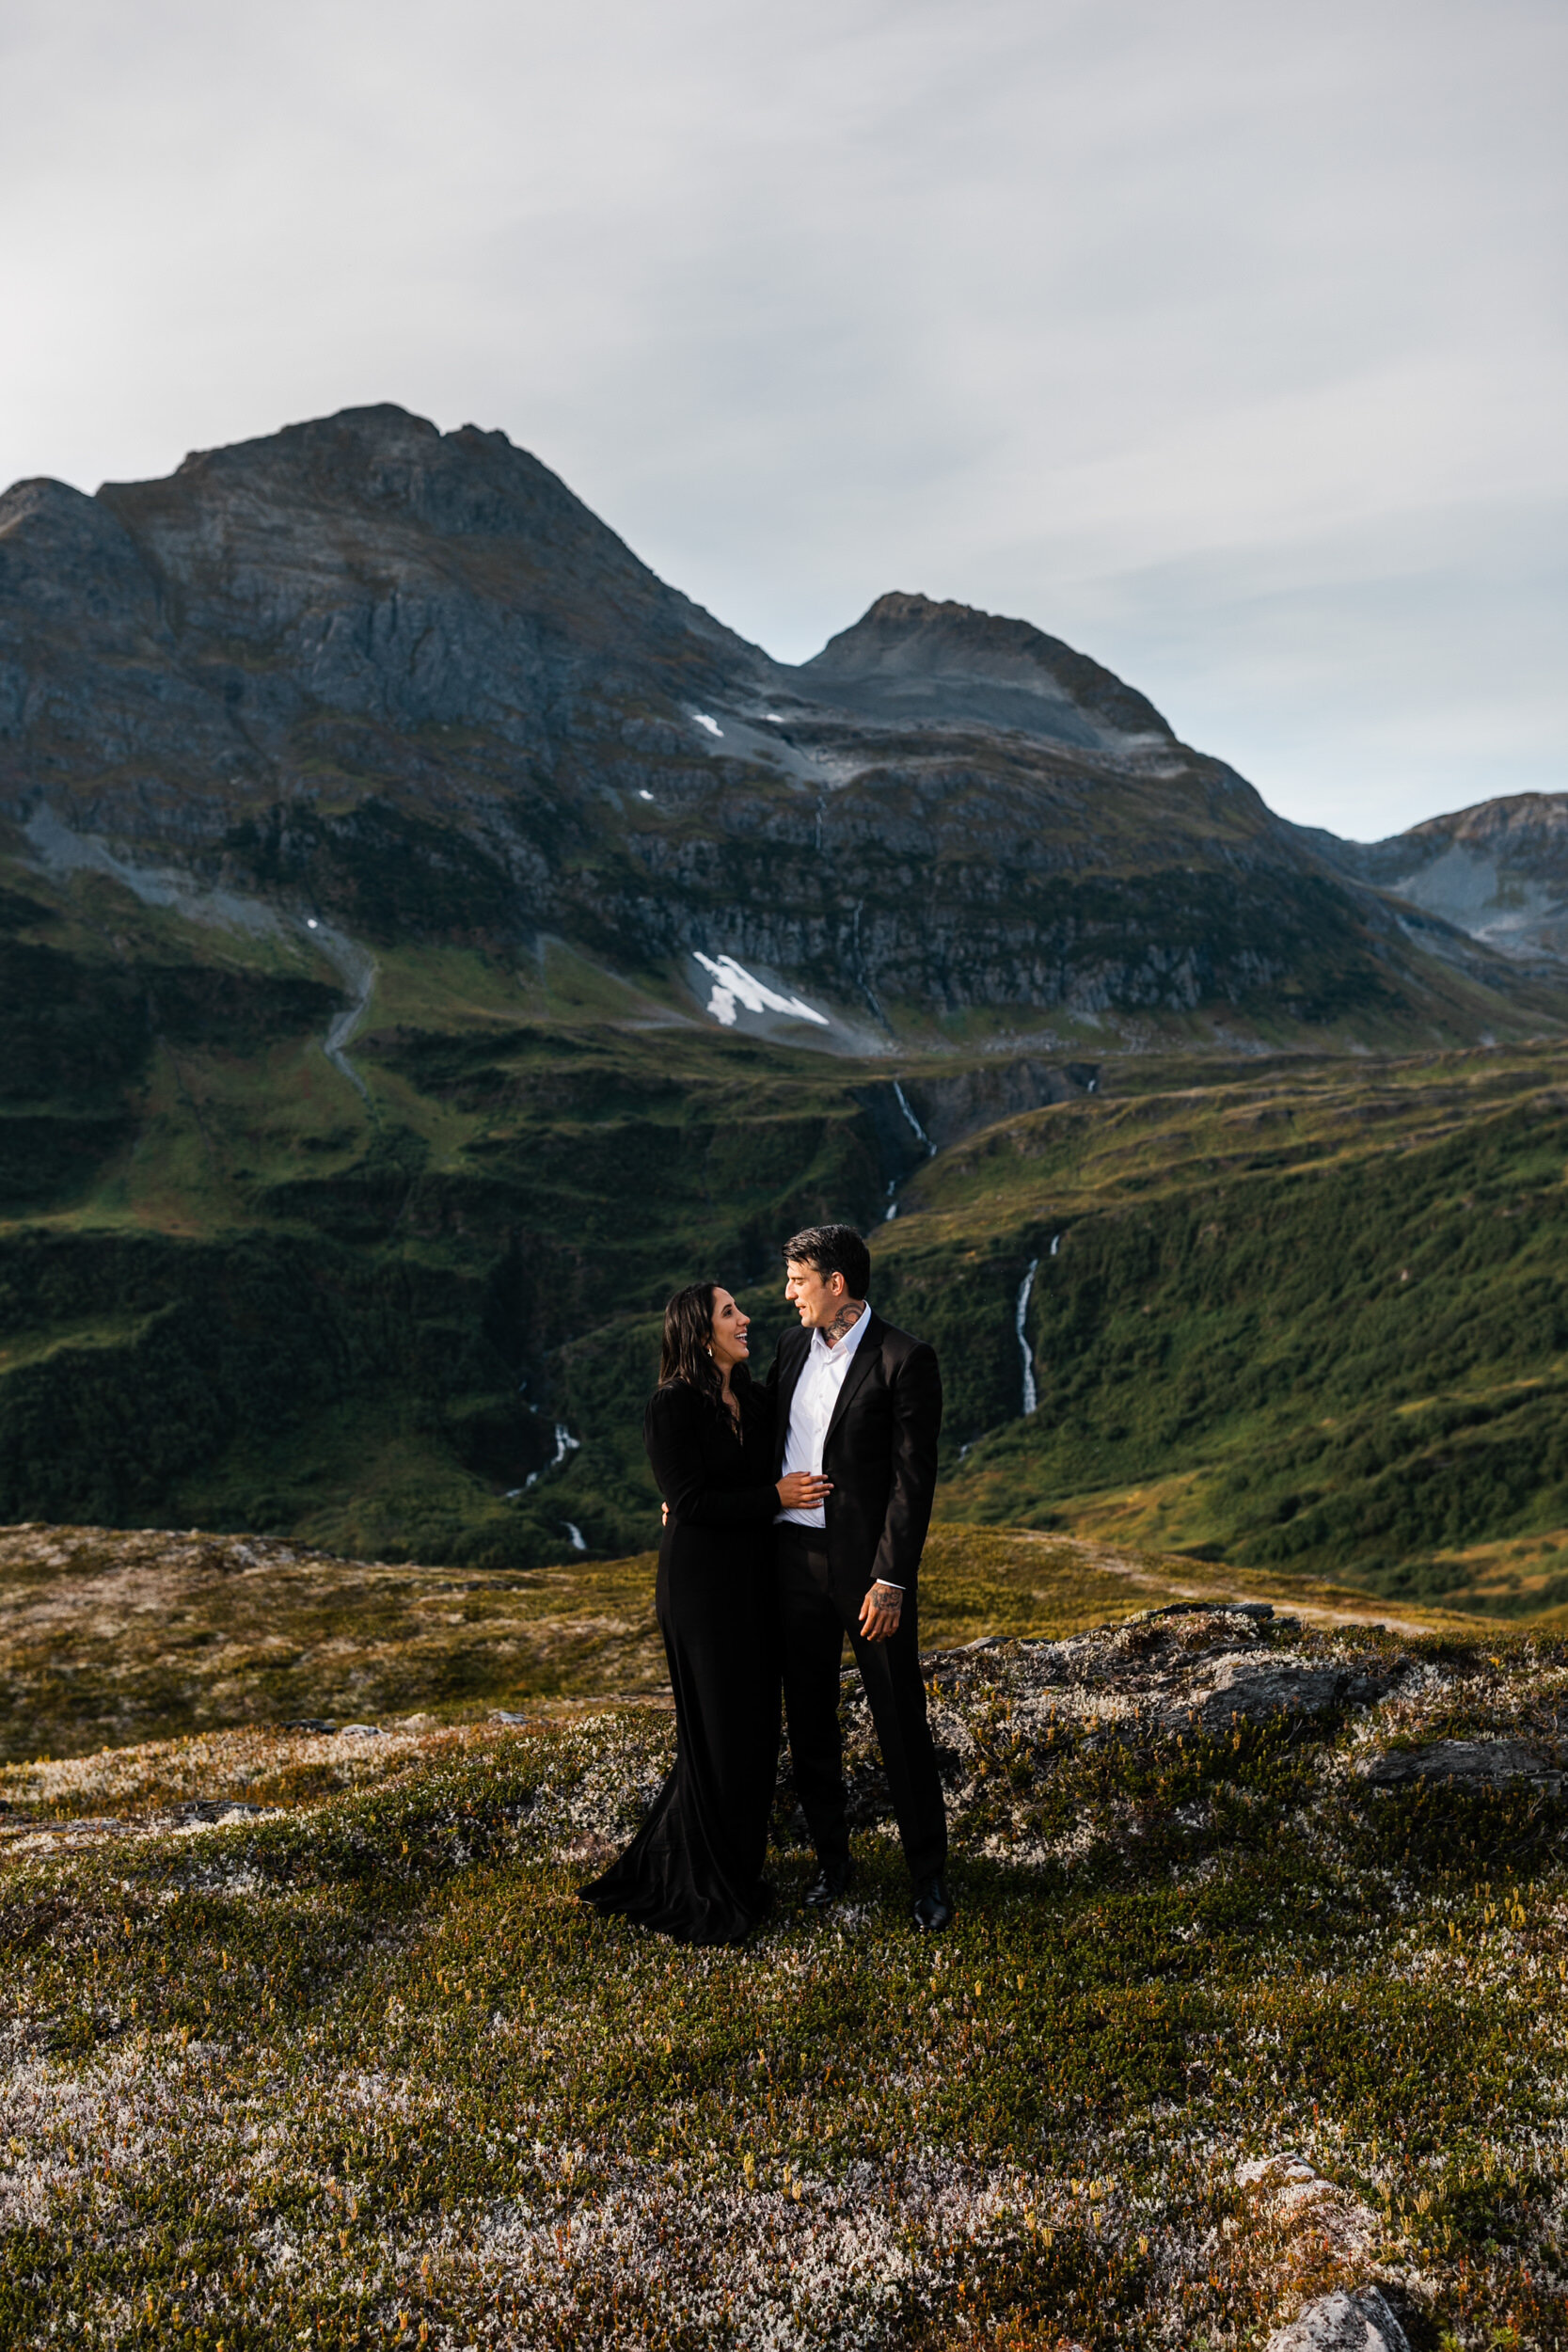 Alaska Engagement | Helicopter Exploration of Tundra | The Hearnes Photography